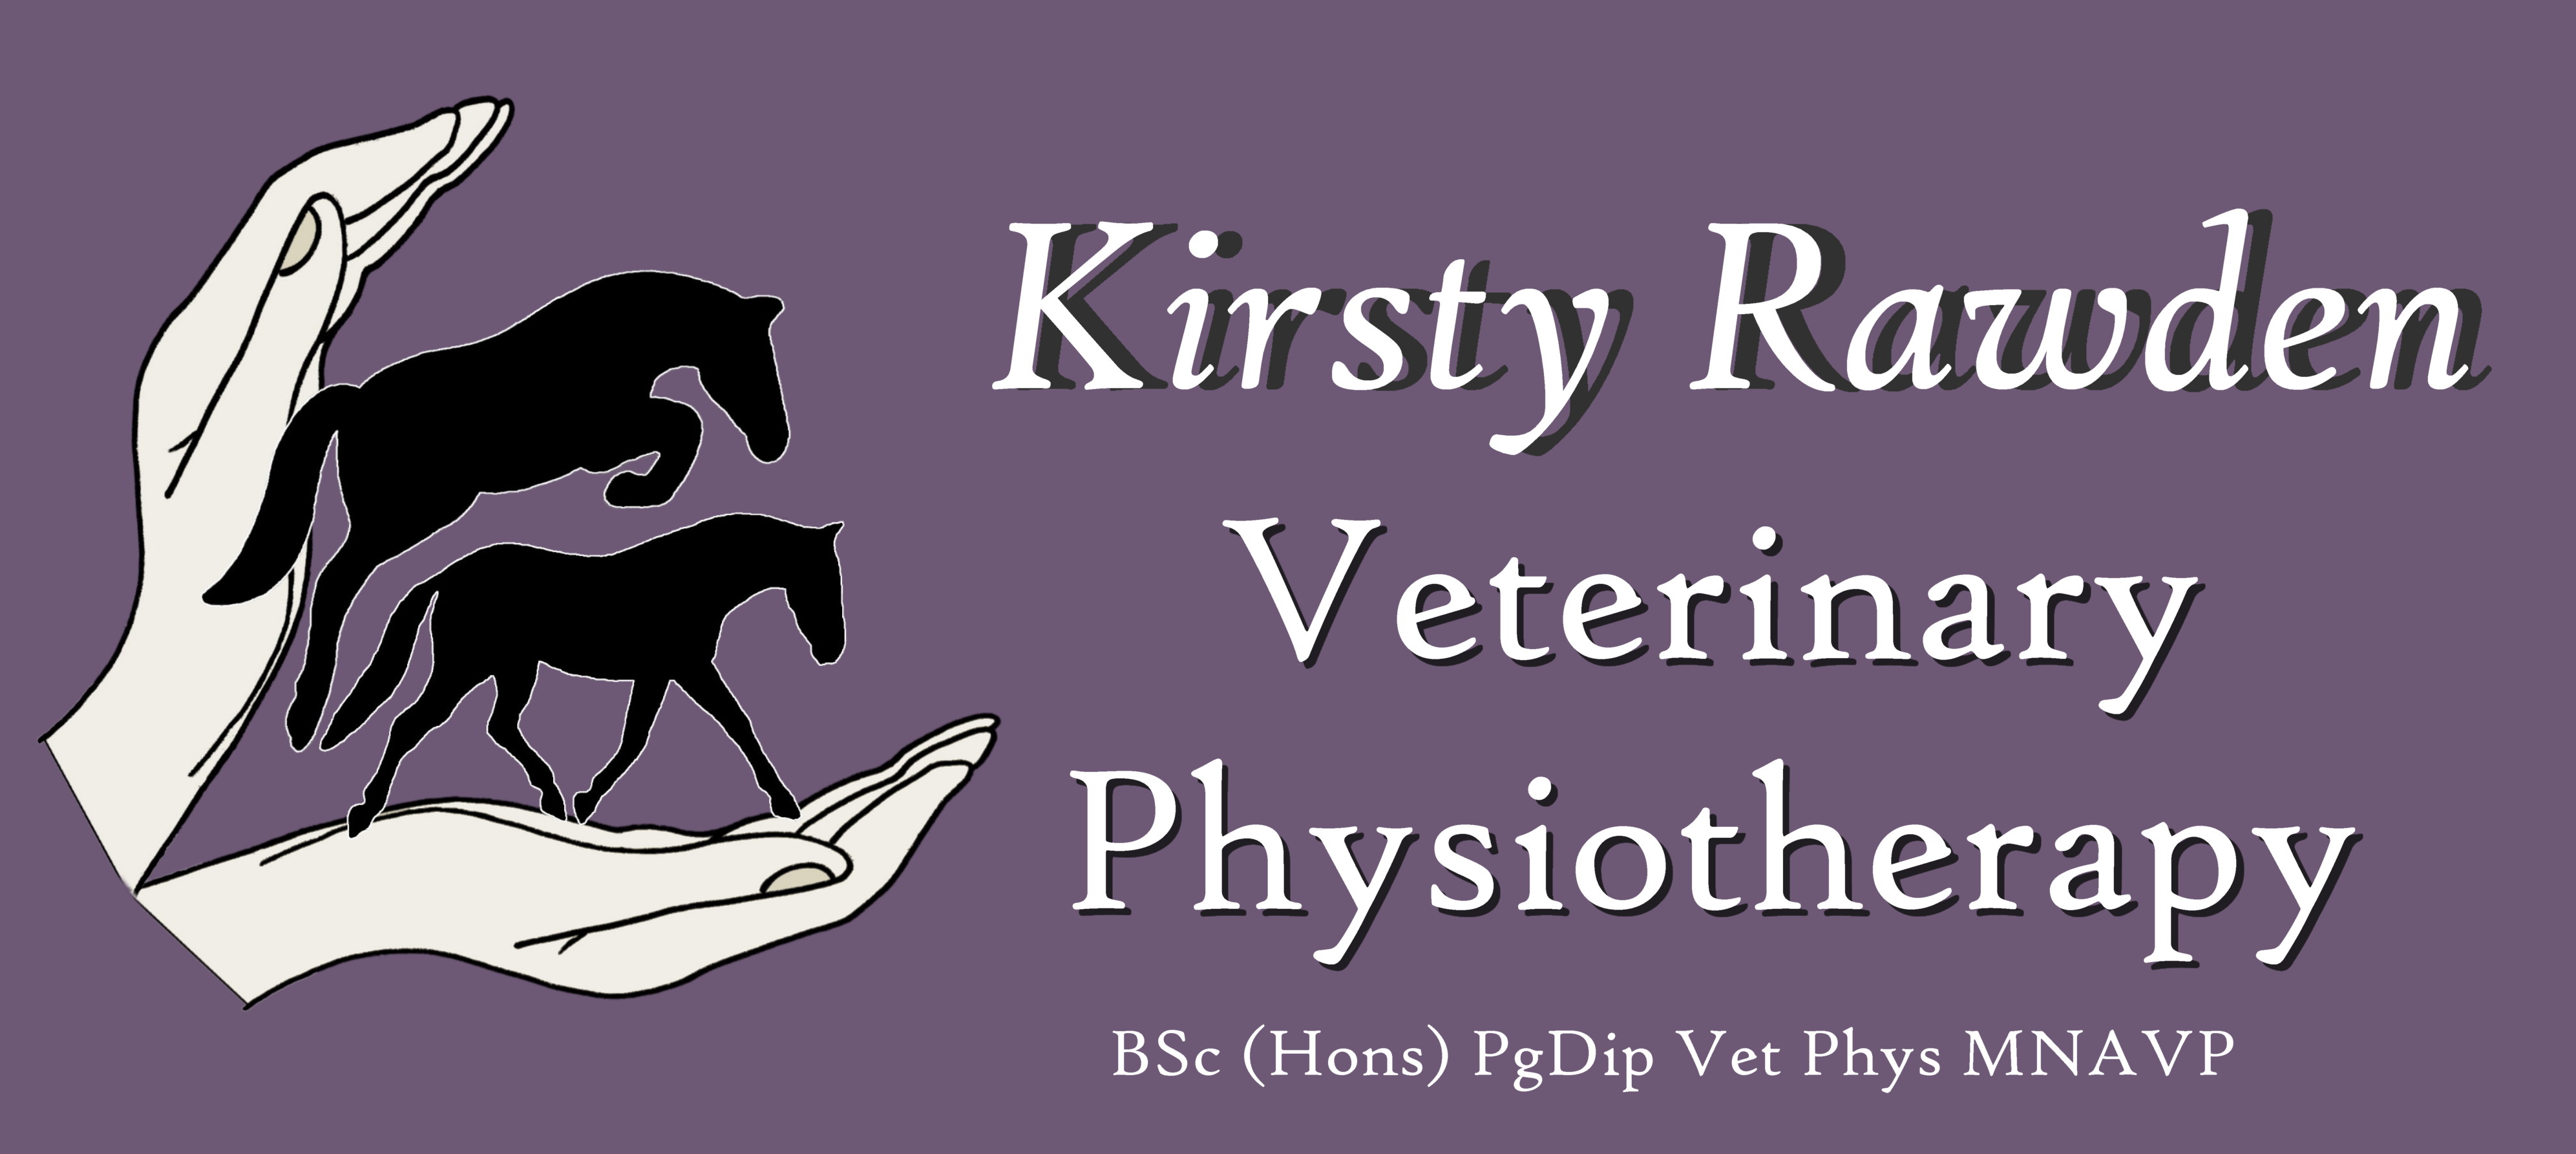 Kirsty Rawden Veterinary Physiotherapy